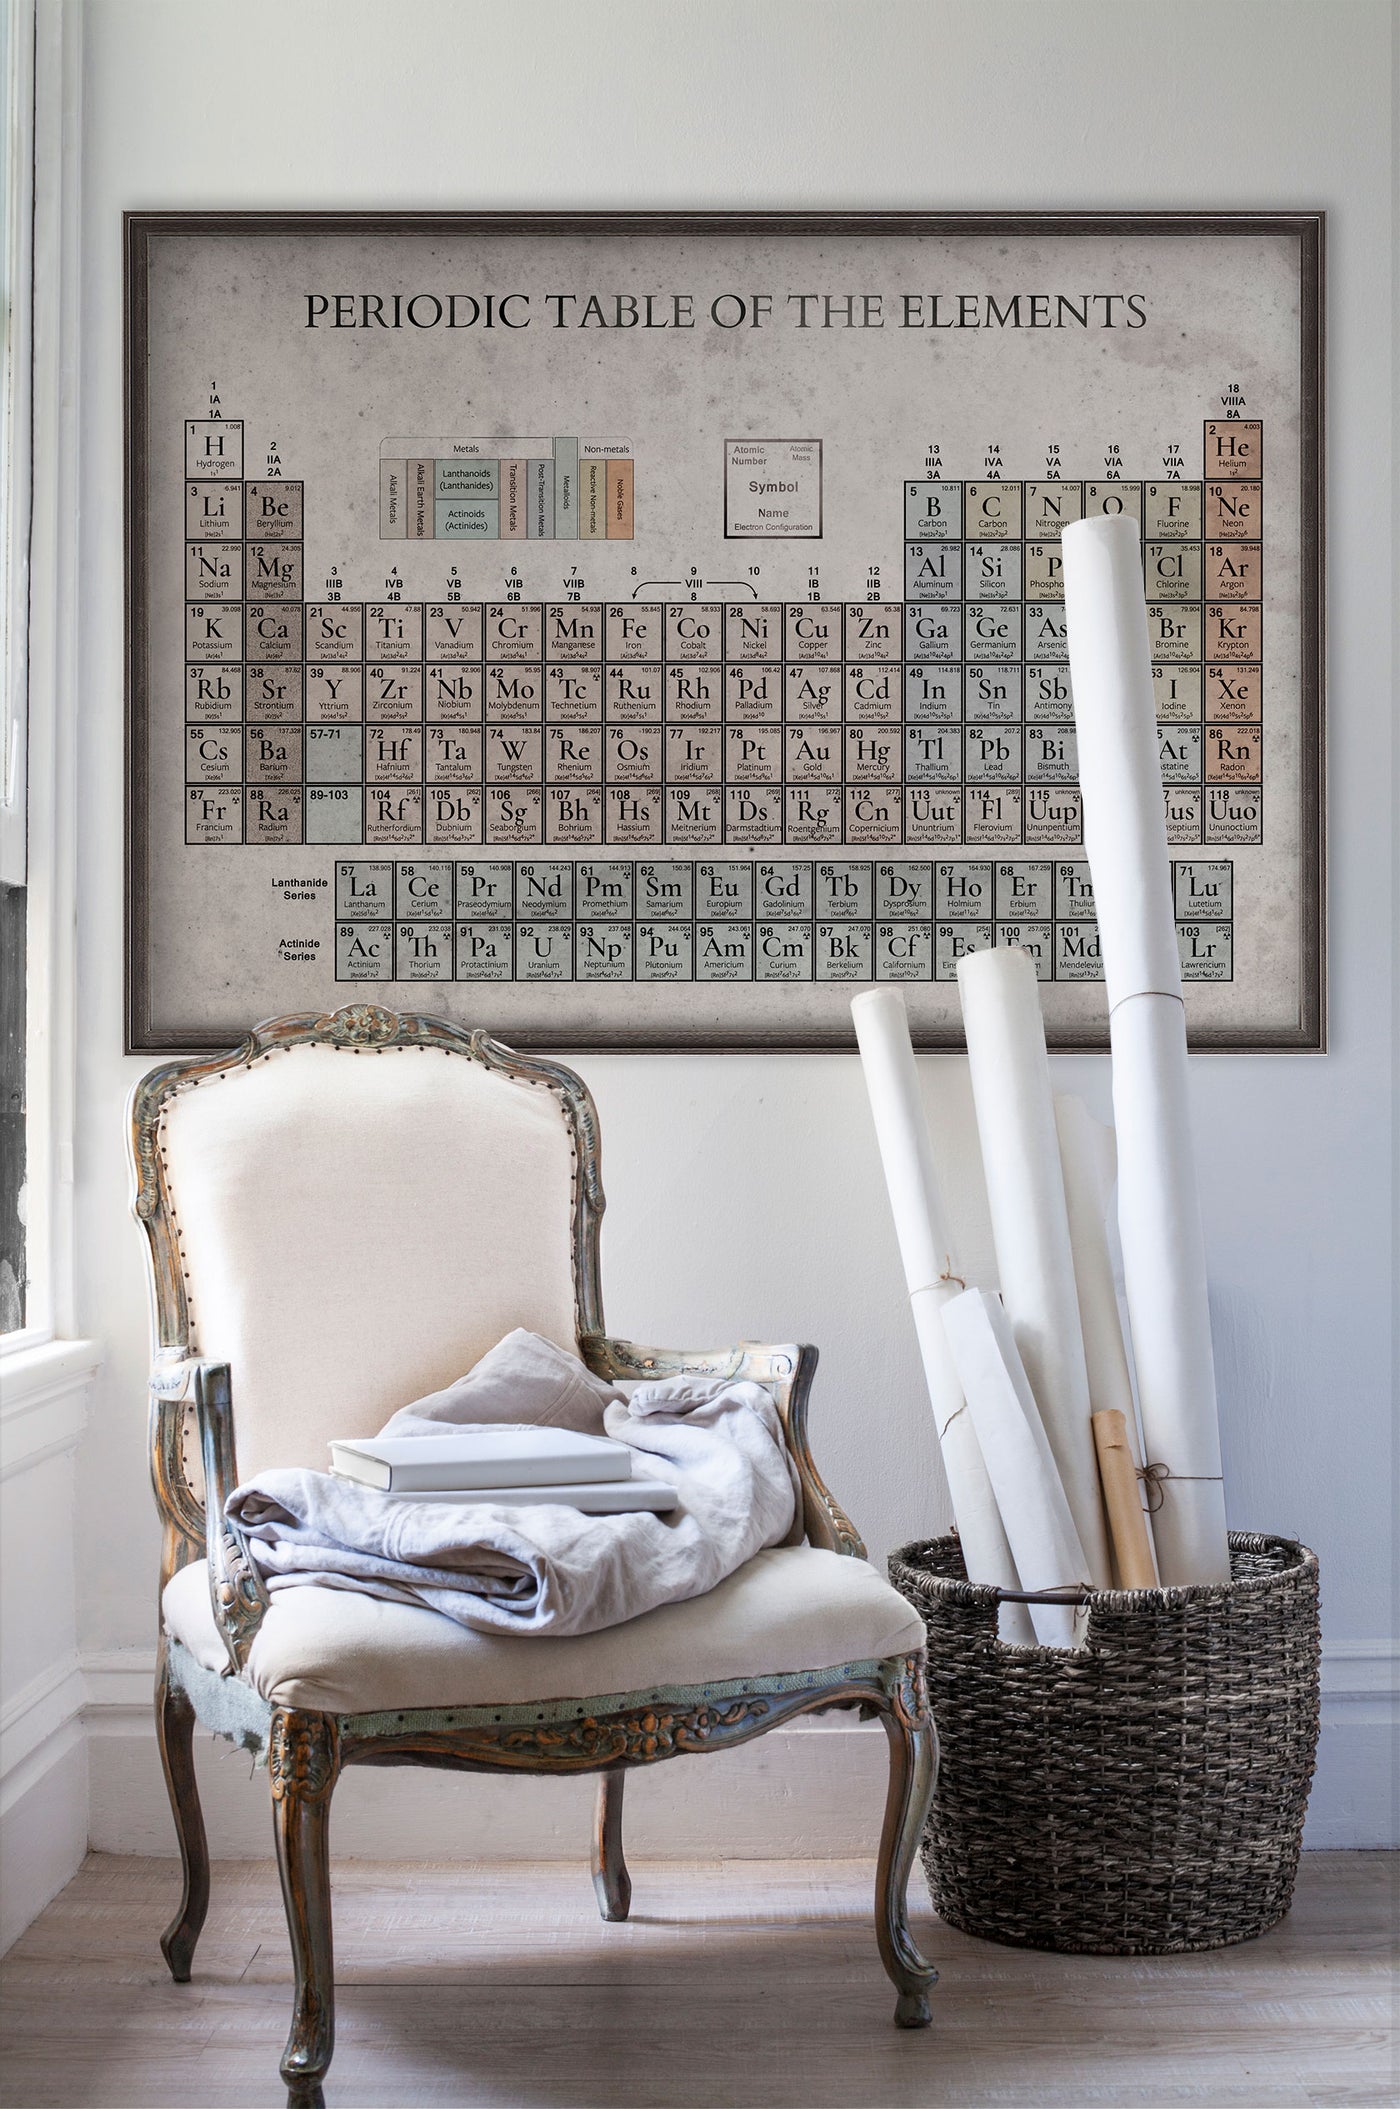 Vintage table of elements poster print art in room with white walls with vintage furniture and vintage decor.